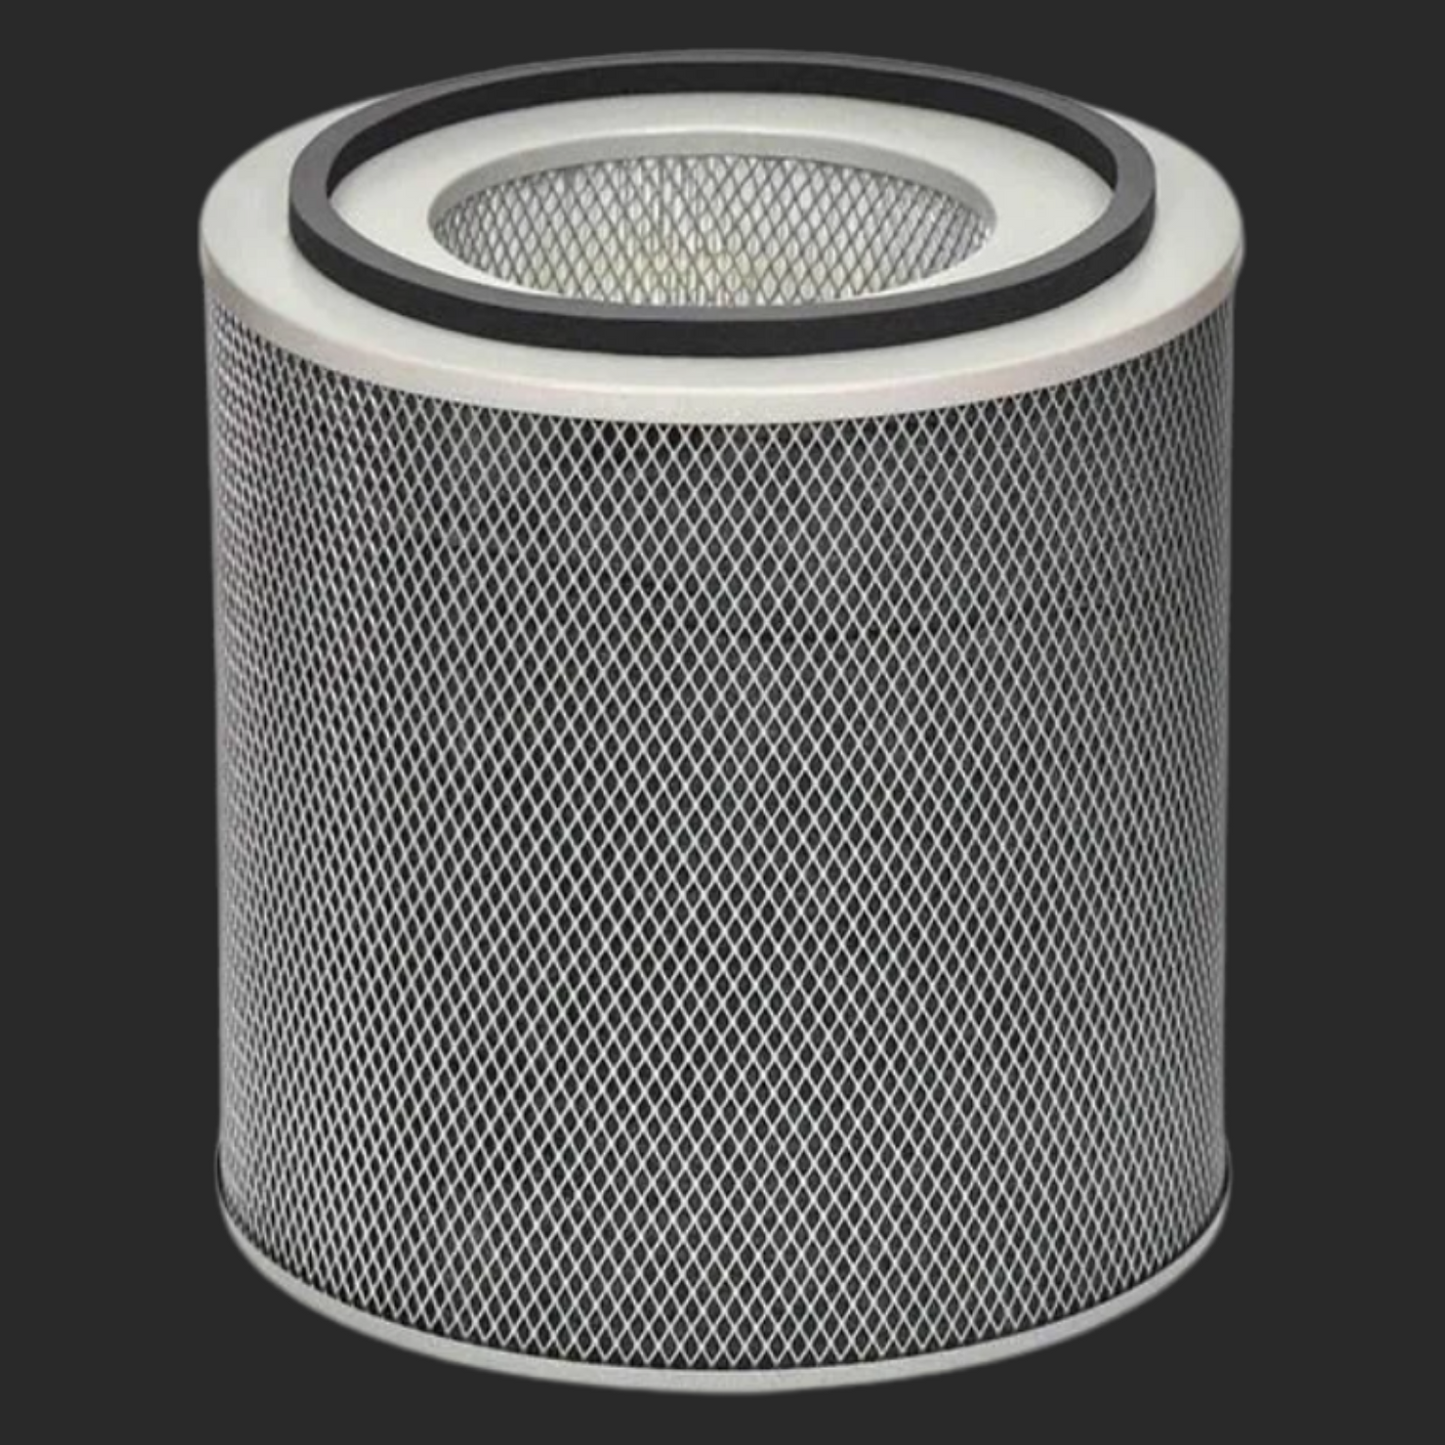 HealthMate400 Replacement Filter